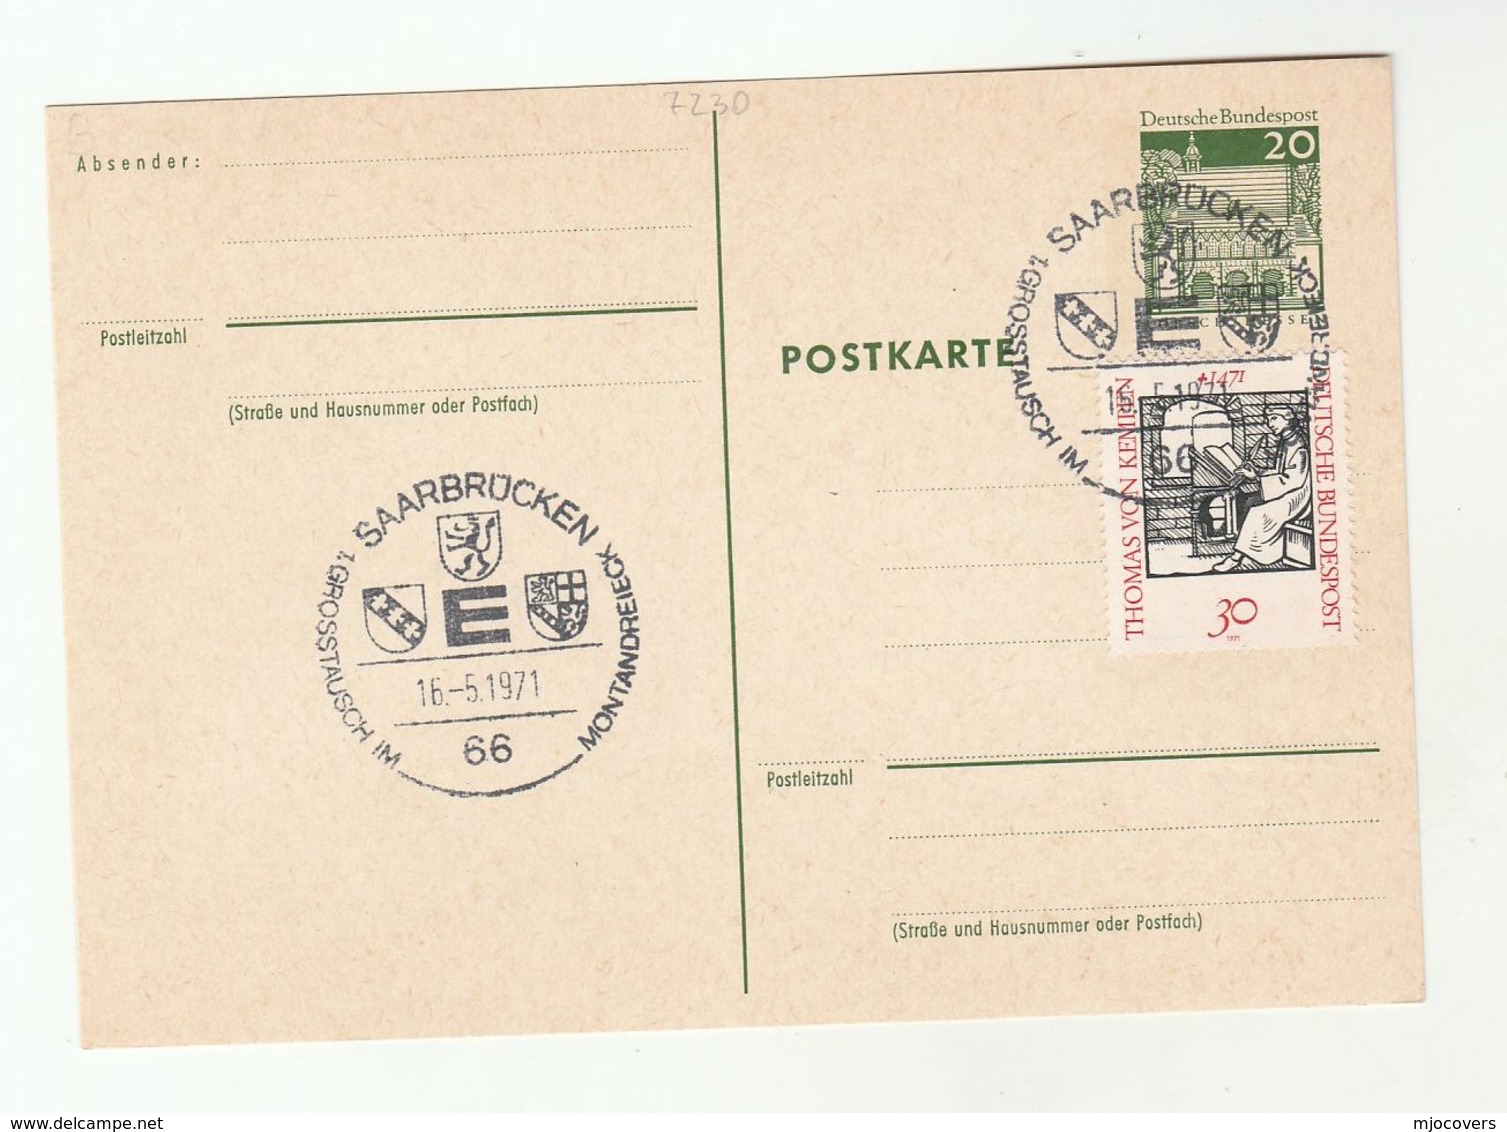 1971 Saarbrucken HERALDIC EVENT COVER Postal Stationery Card Coat Of Arms Germany Uprated Stamps - Postcards - Used